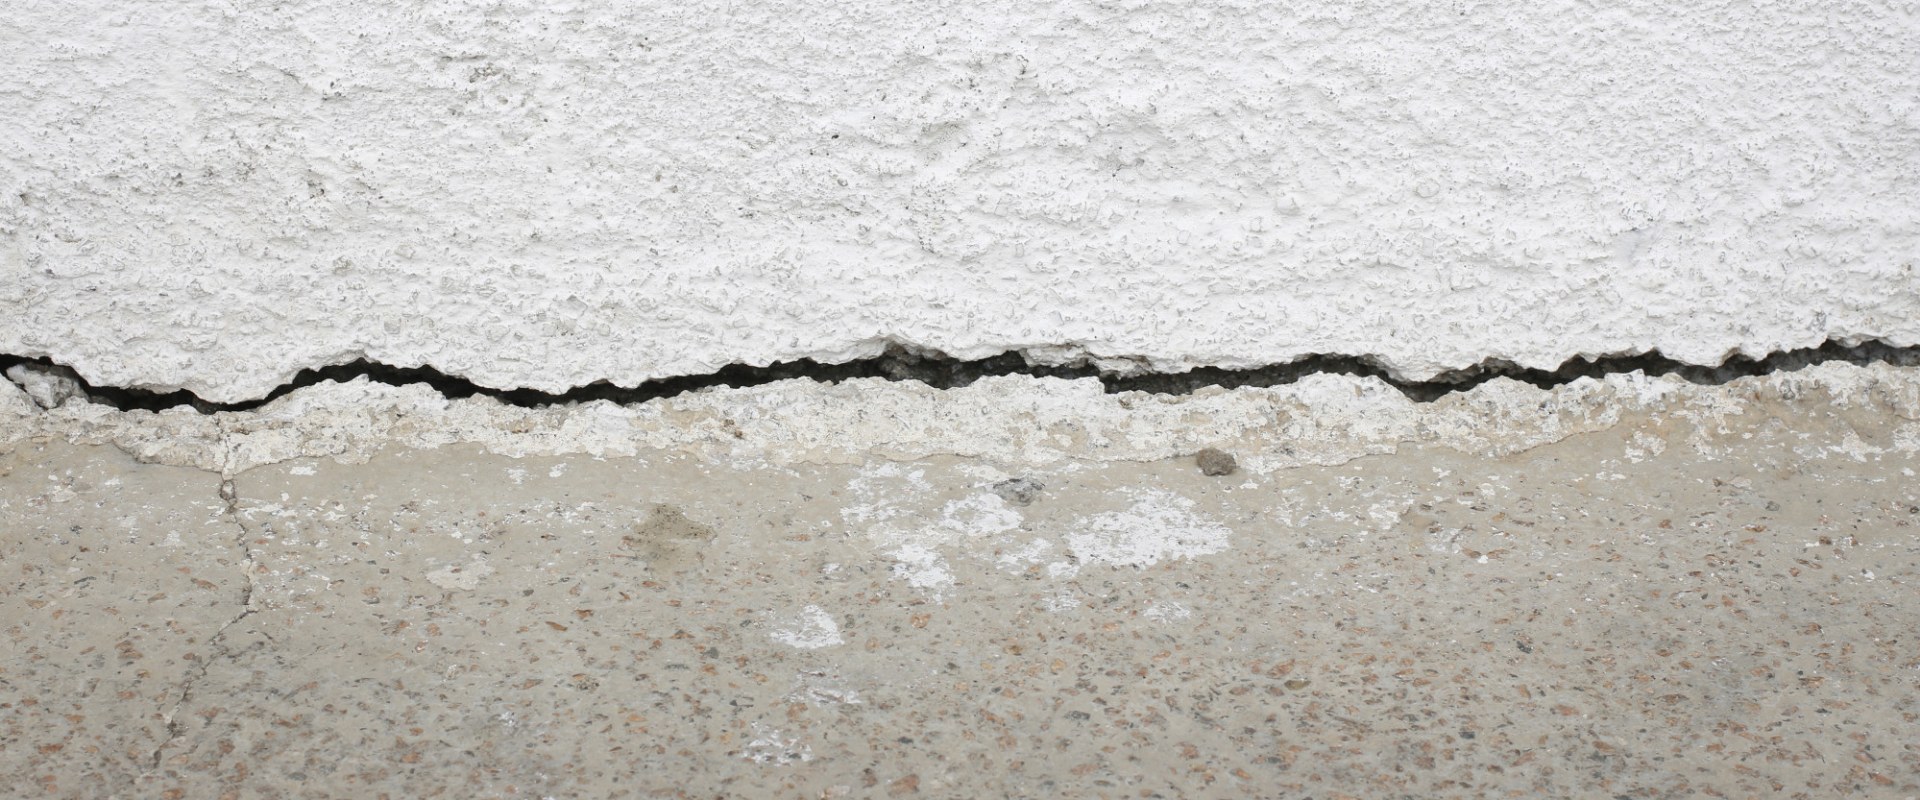 Cracks in the Foundation: What You Need to Know